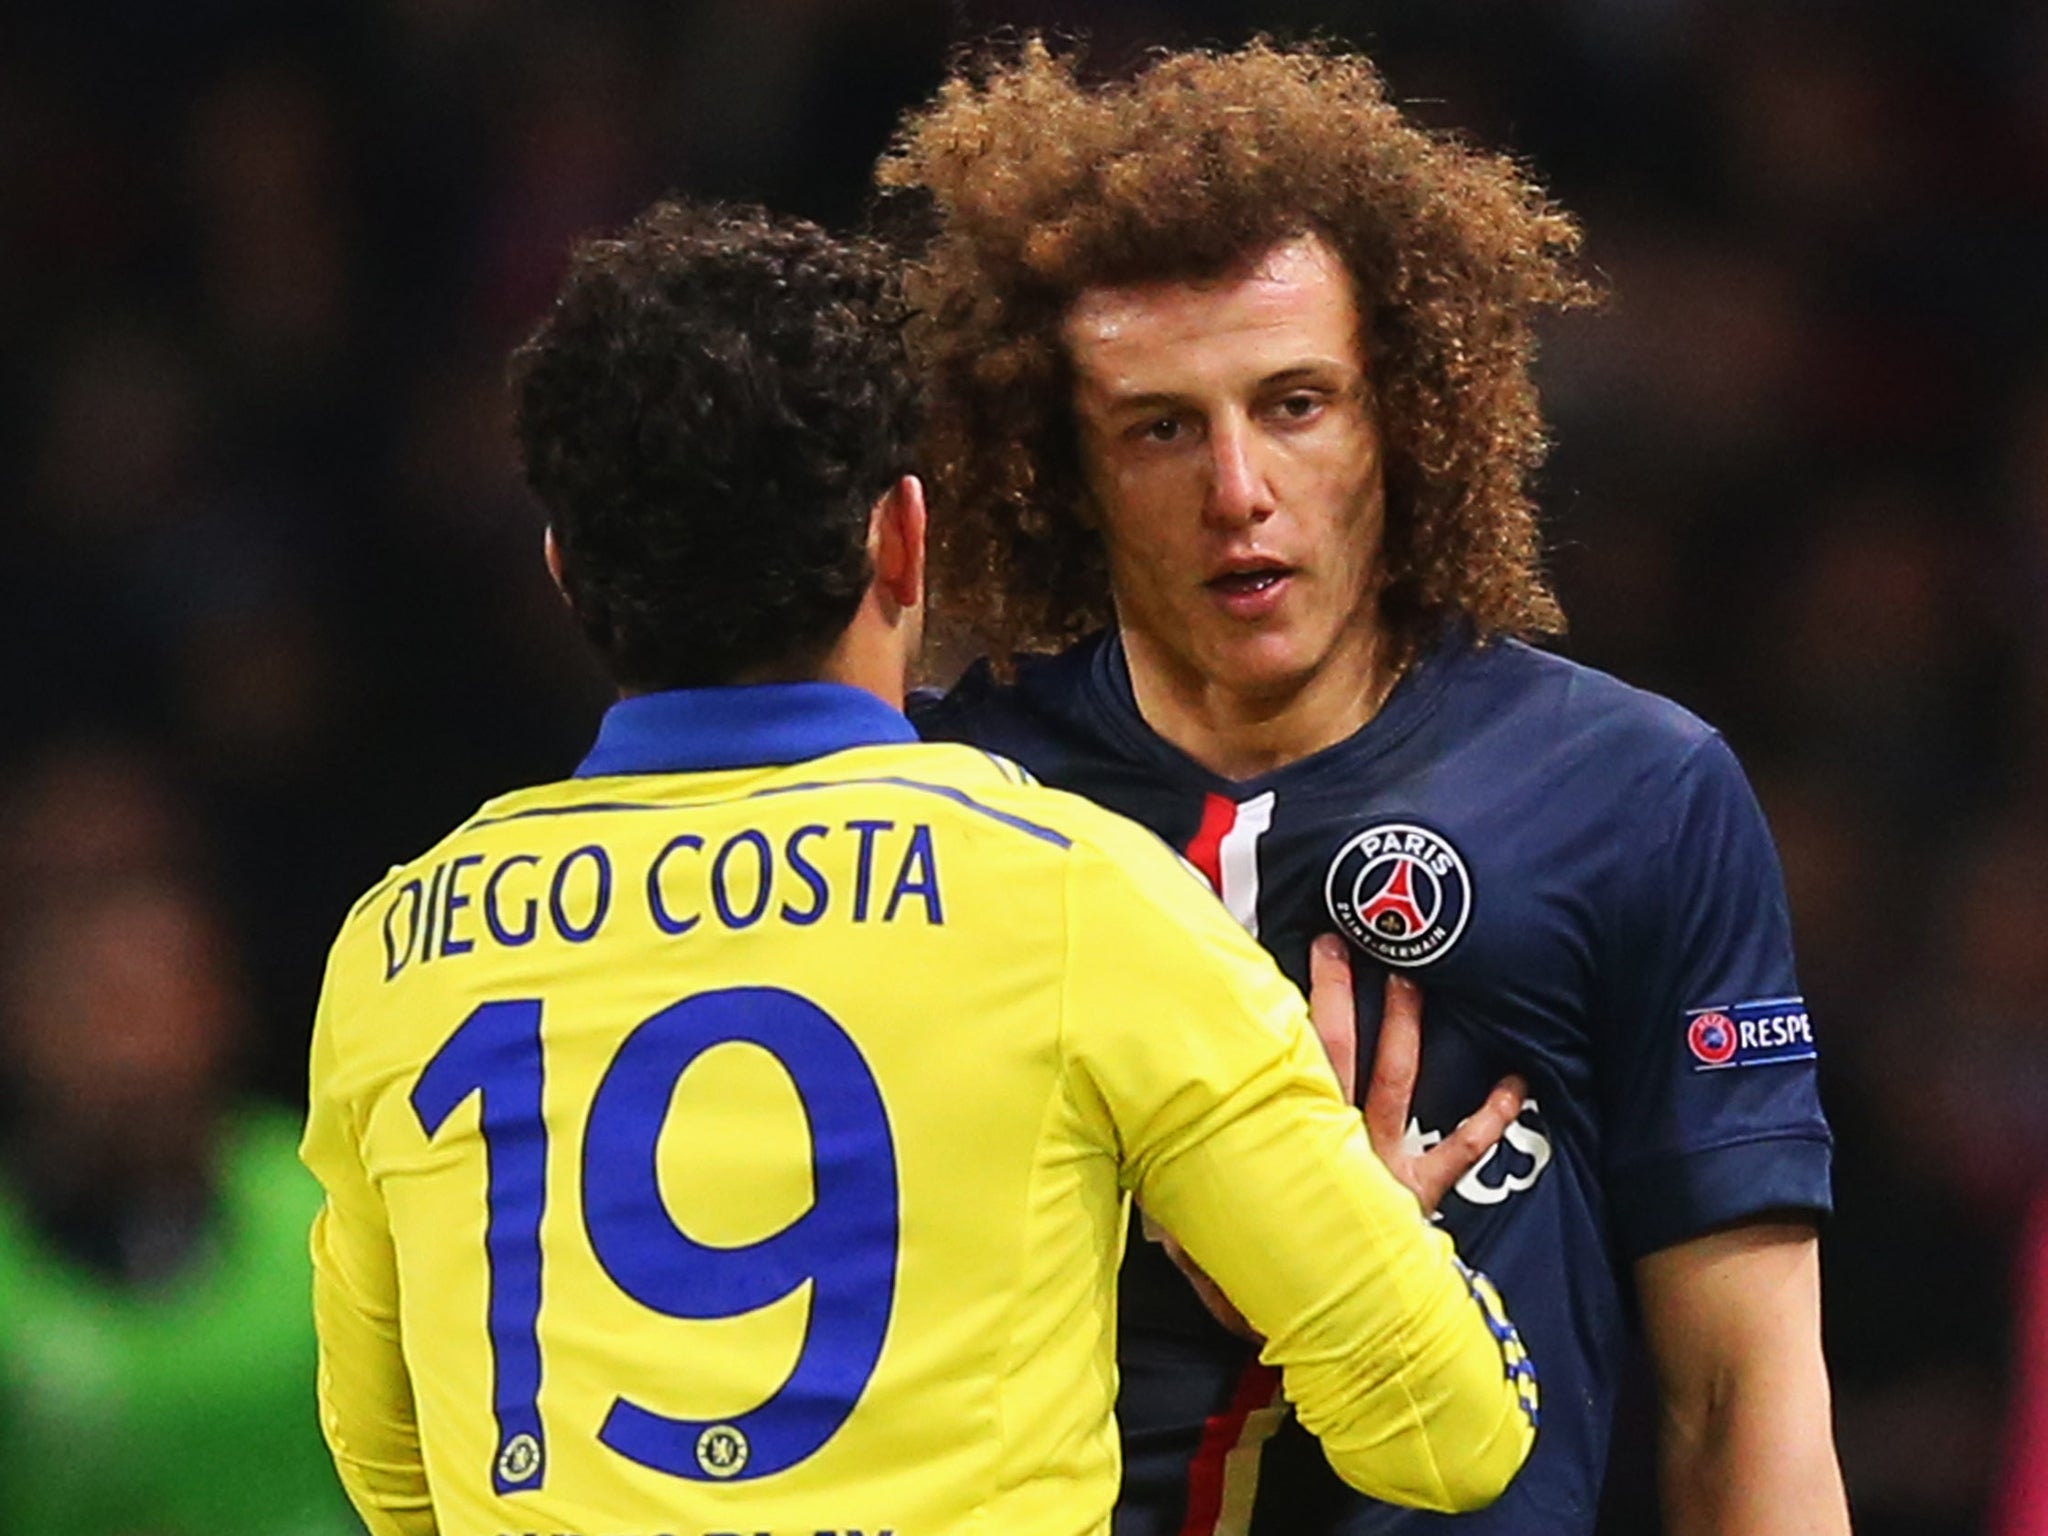 Diego Costa and David Luiz come together